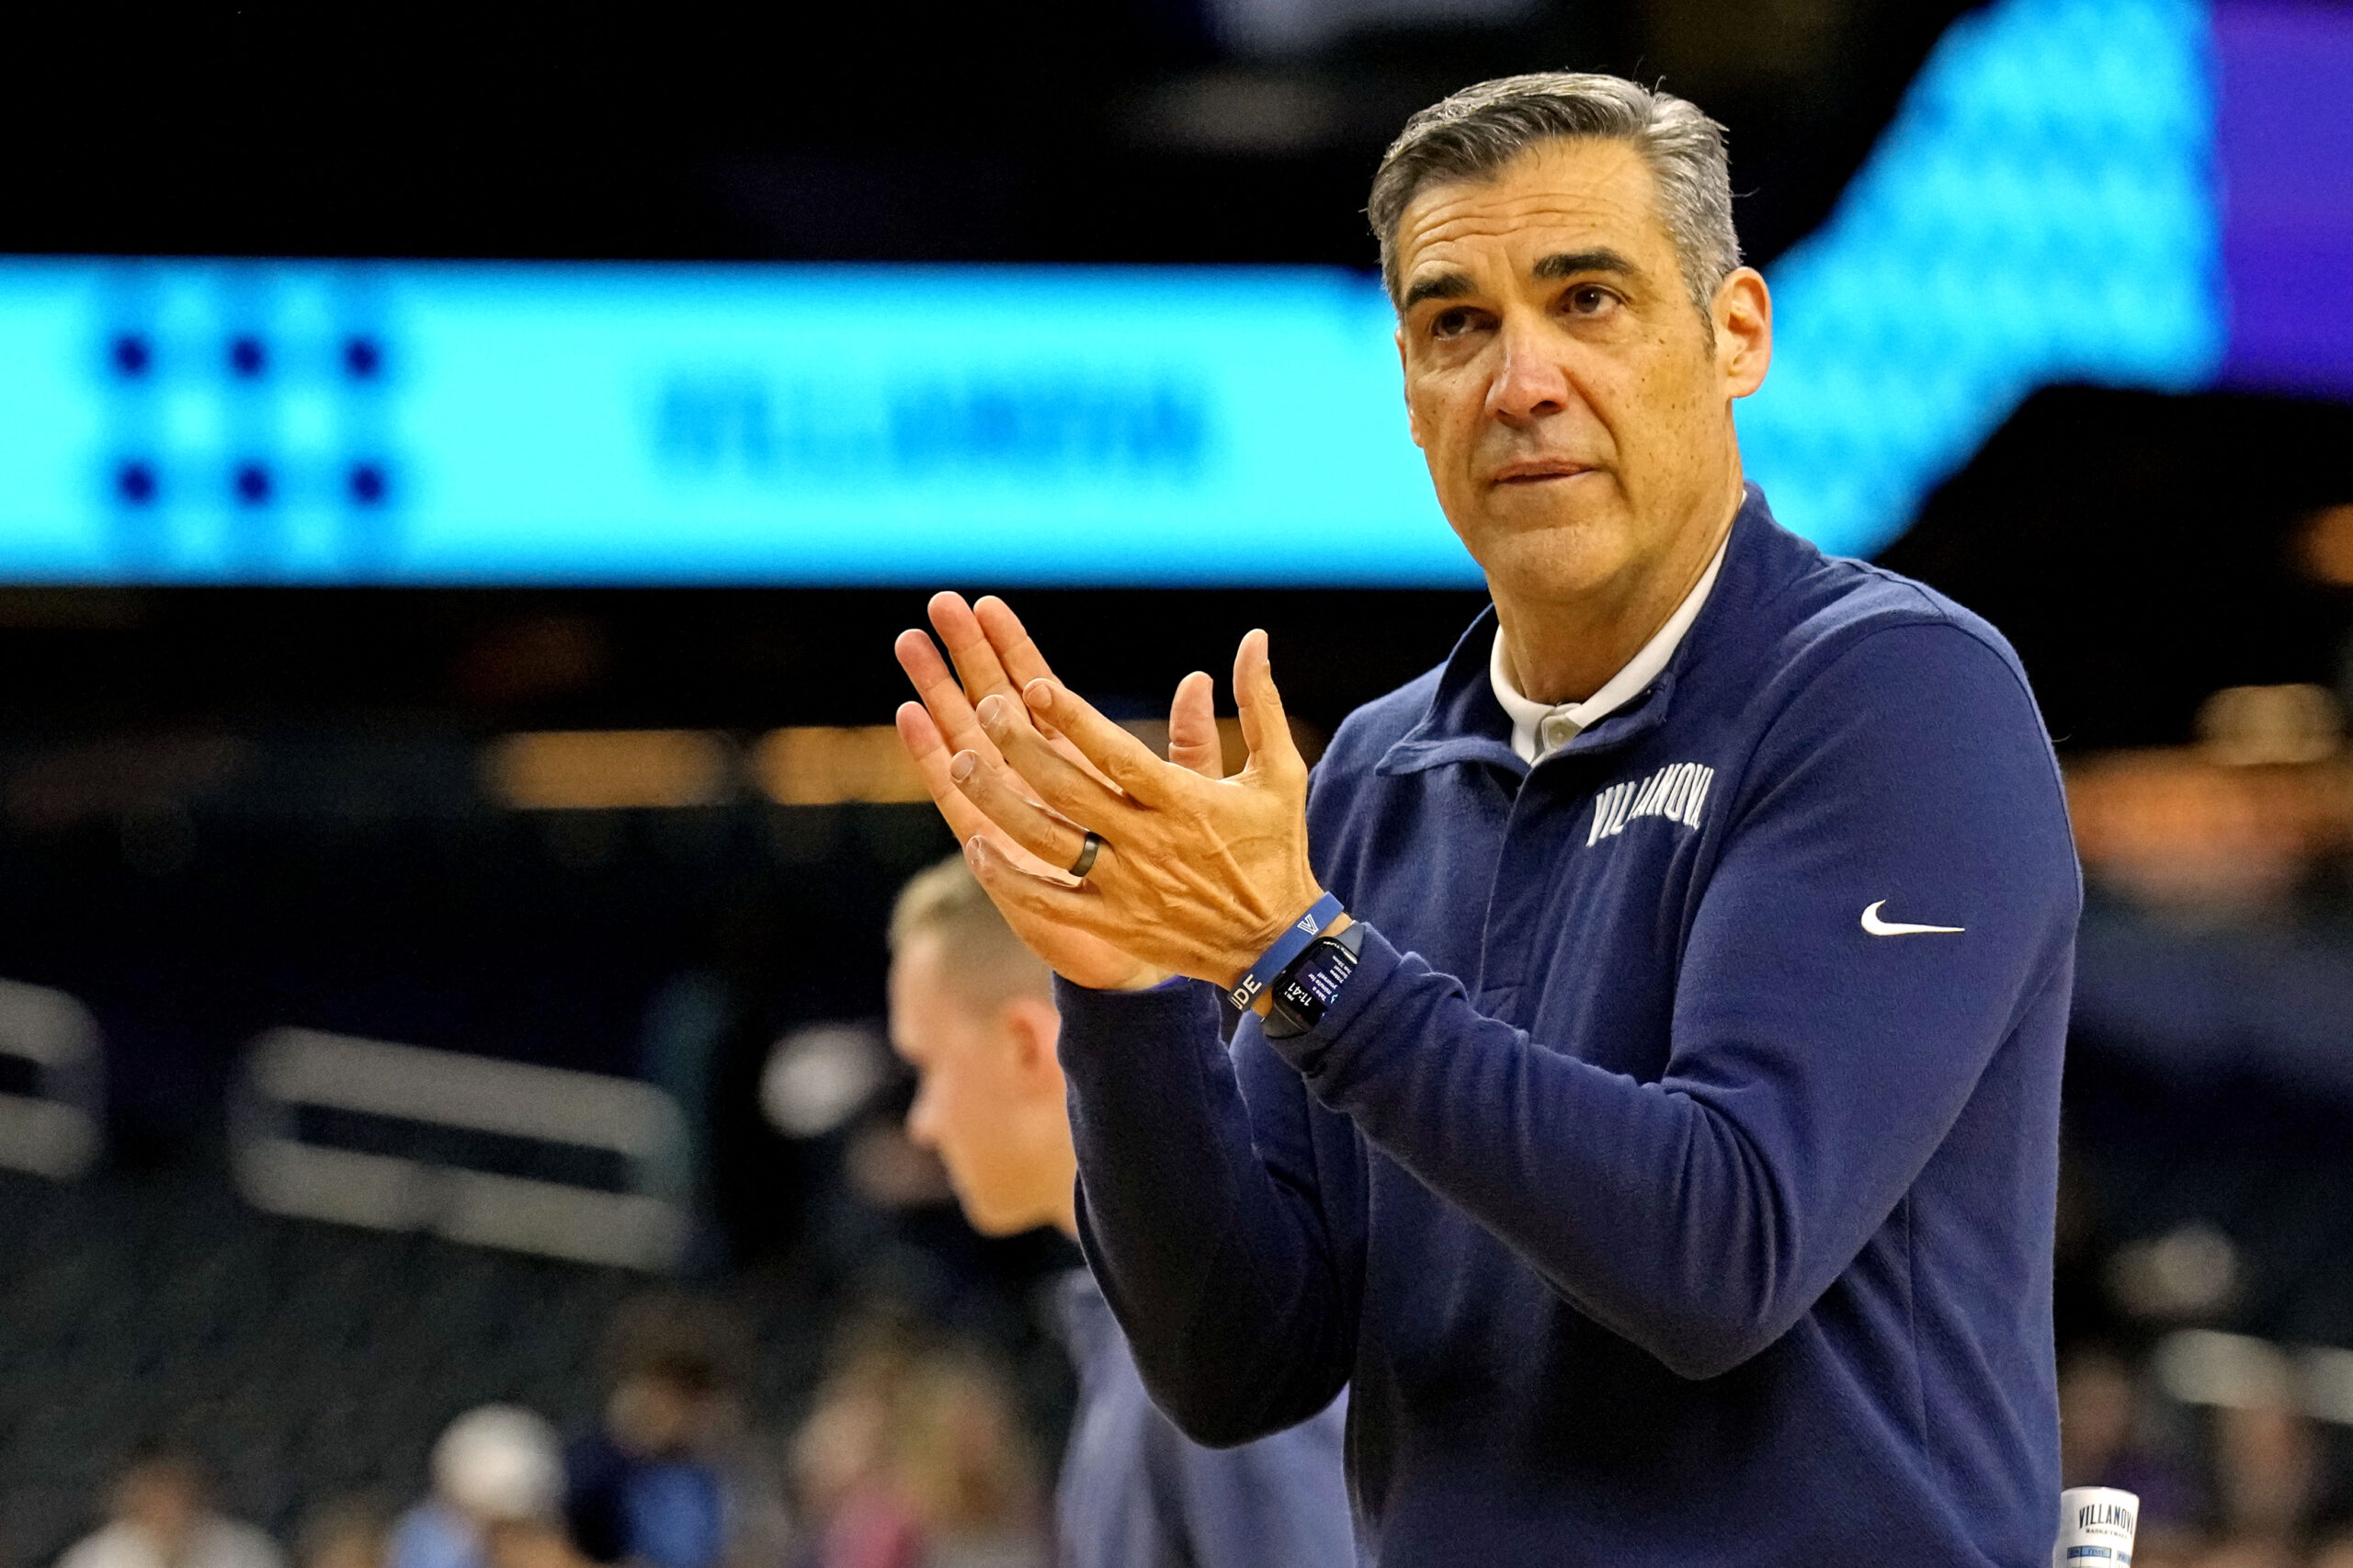 Apr 1, 2022; New Orleans, LA, USA; Villanova Wildcats head coach Jay Wright during the Final Four practice at Caesars Superdome. Mandatory Credit: Robert Deutsch-USA TODAY Sports